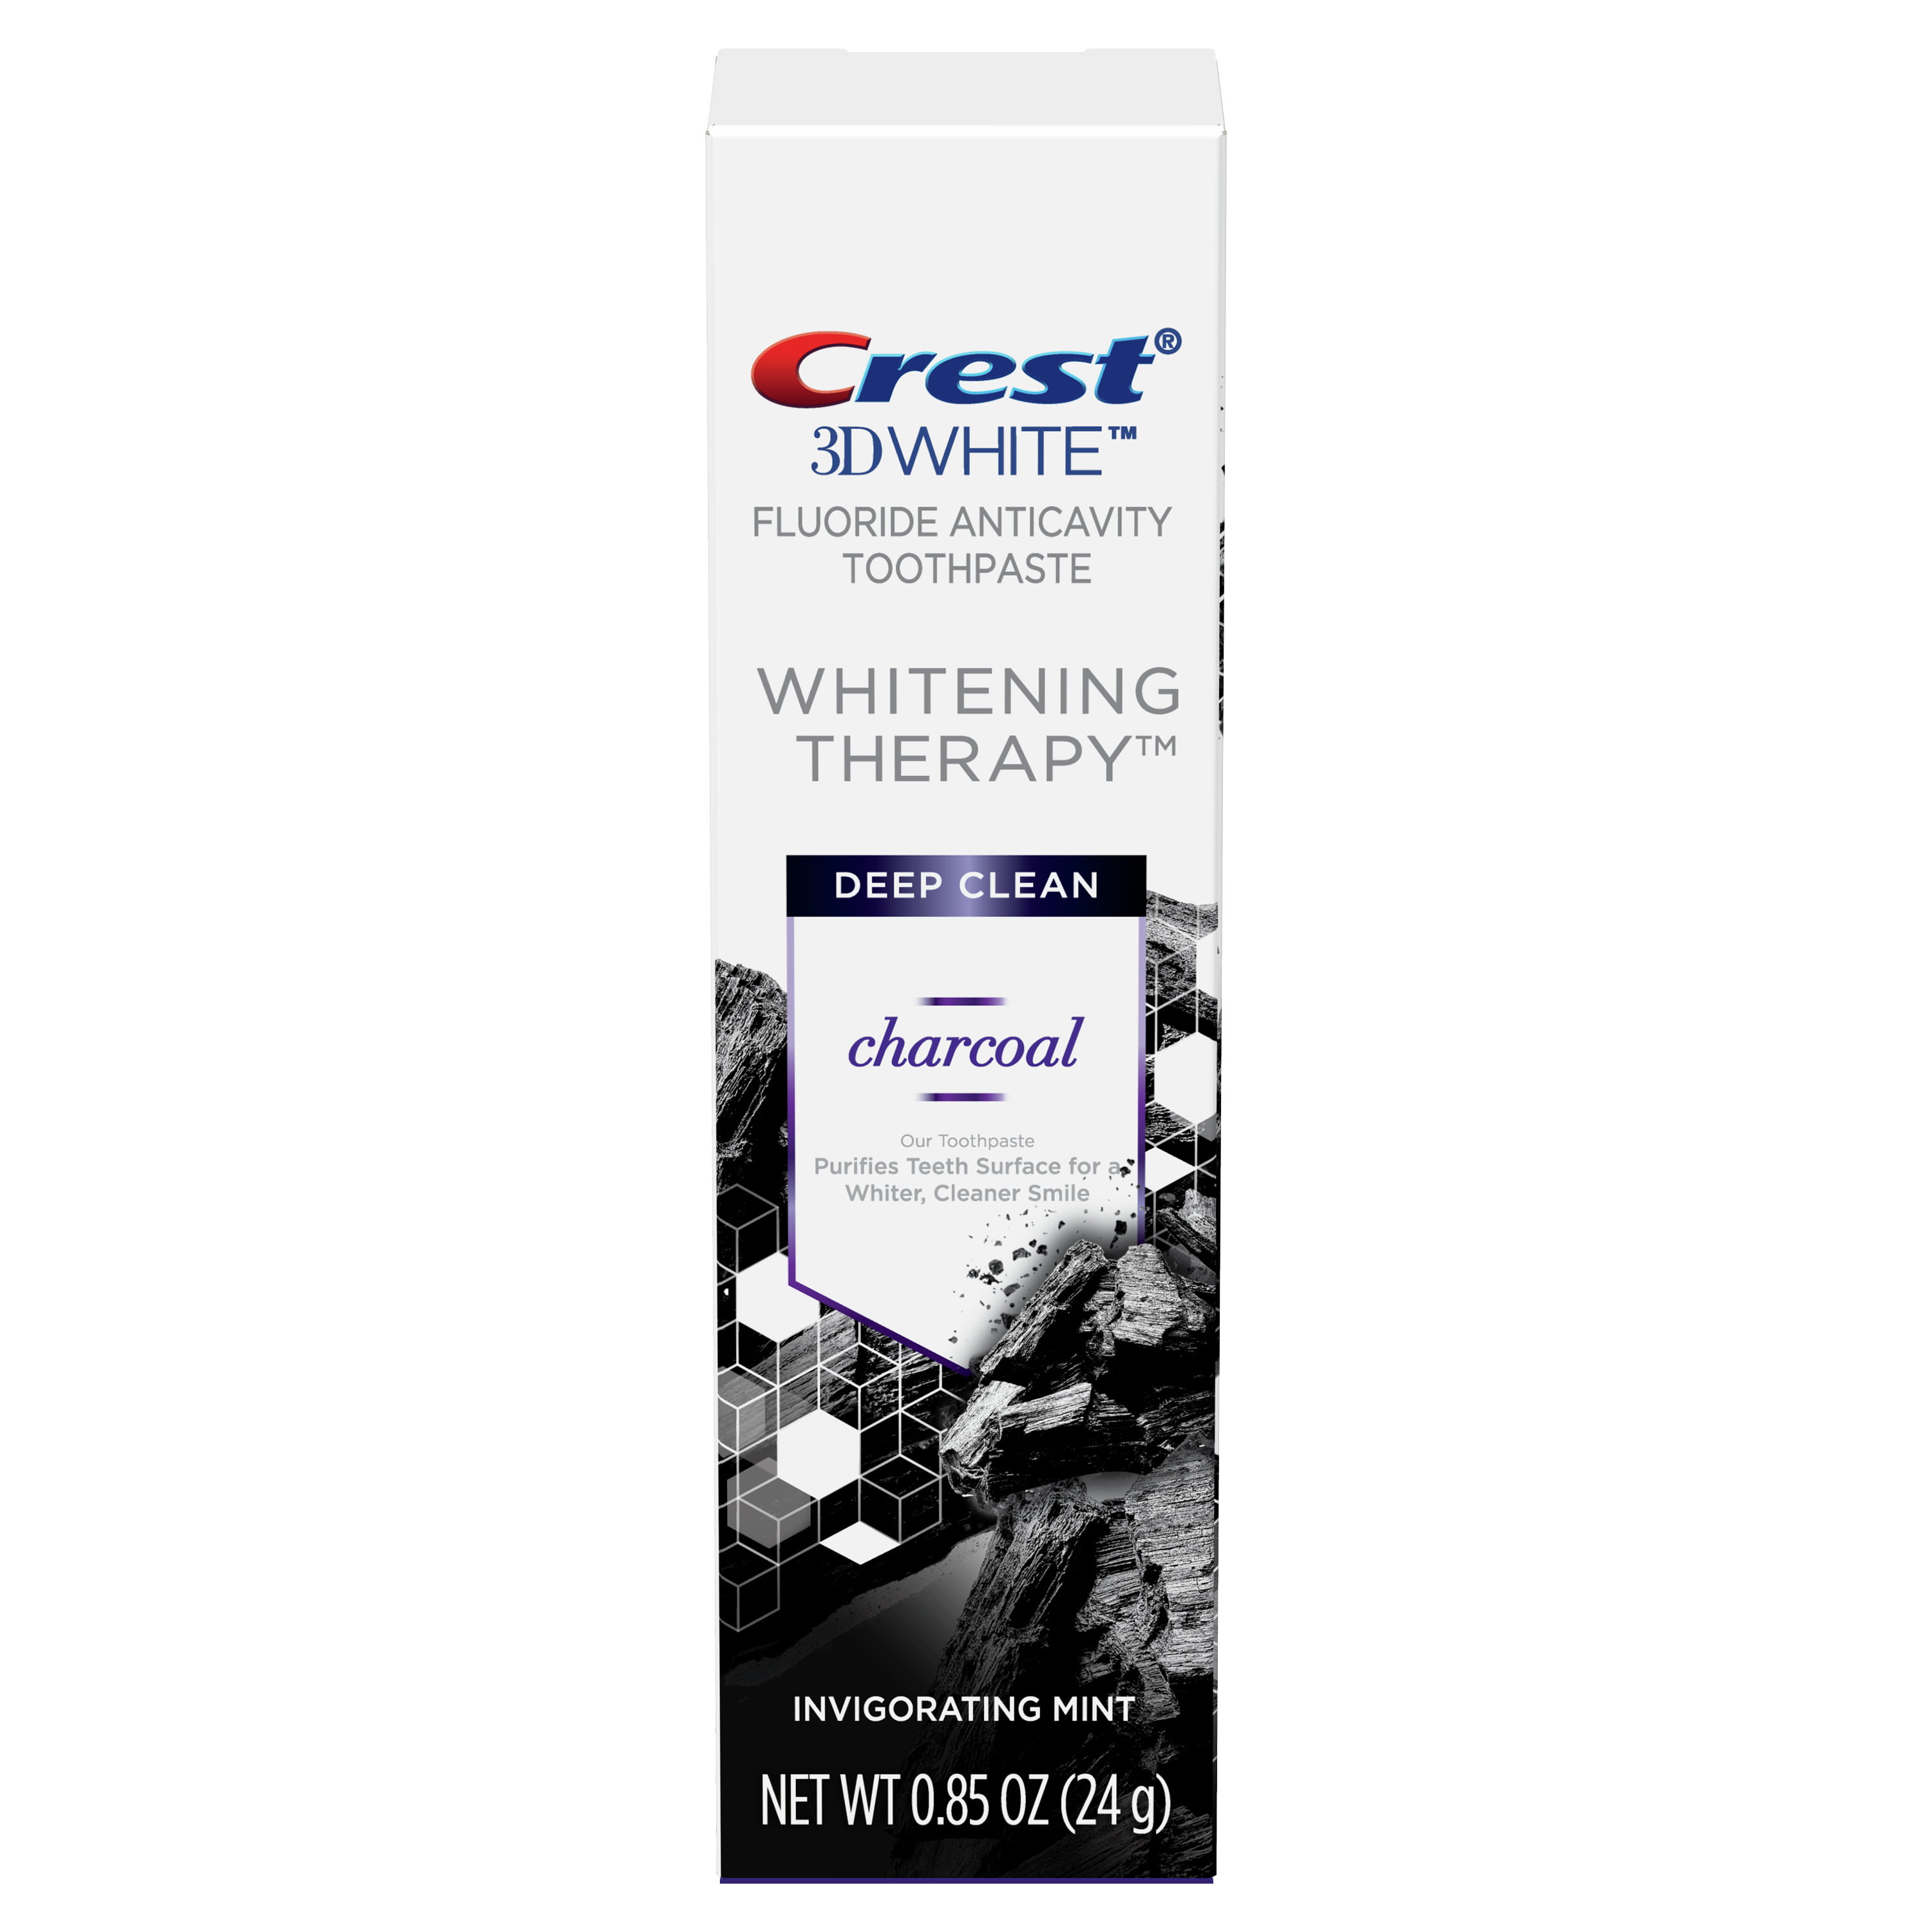 0.85-Oz Crest 3D White Whitening Therapy Charcoal Deep Clean Fluoride Toothpaste (Invigorating Mint) $0.97 + Free Store Pickup at Walmart